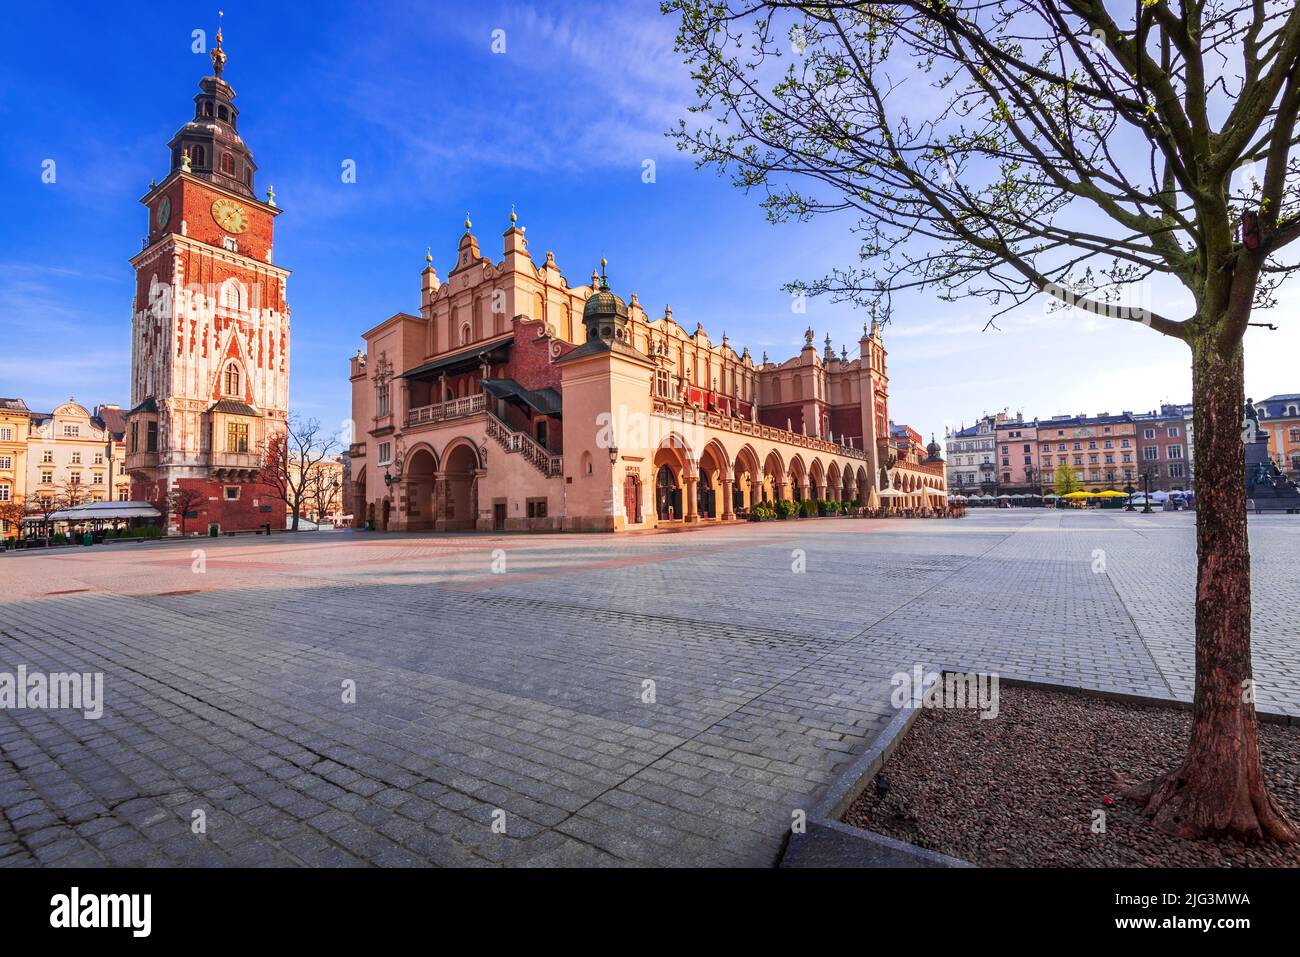 Krakow, Poland. Sunrise light with Ryenek Square historical downtown of Cracovia. Town Hall Tower and the Cloth Hall. Stock Photo